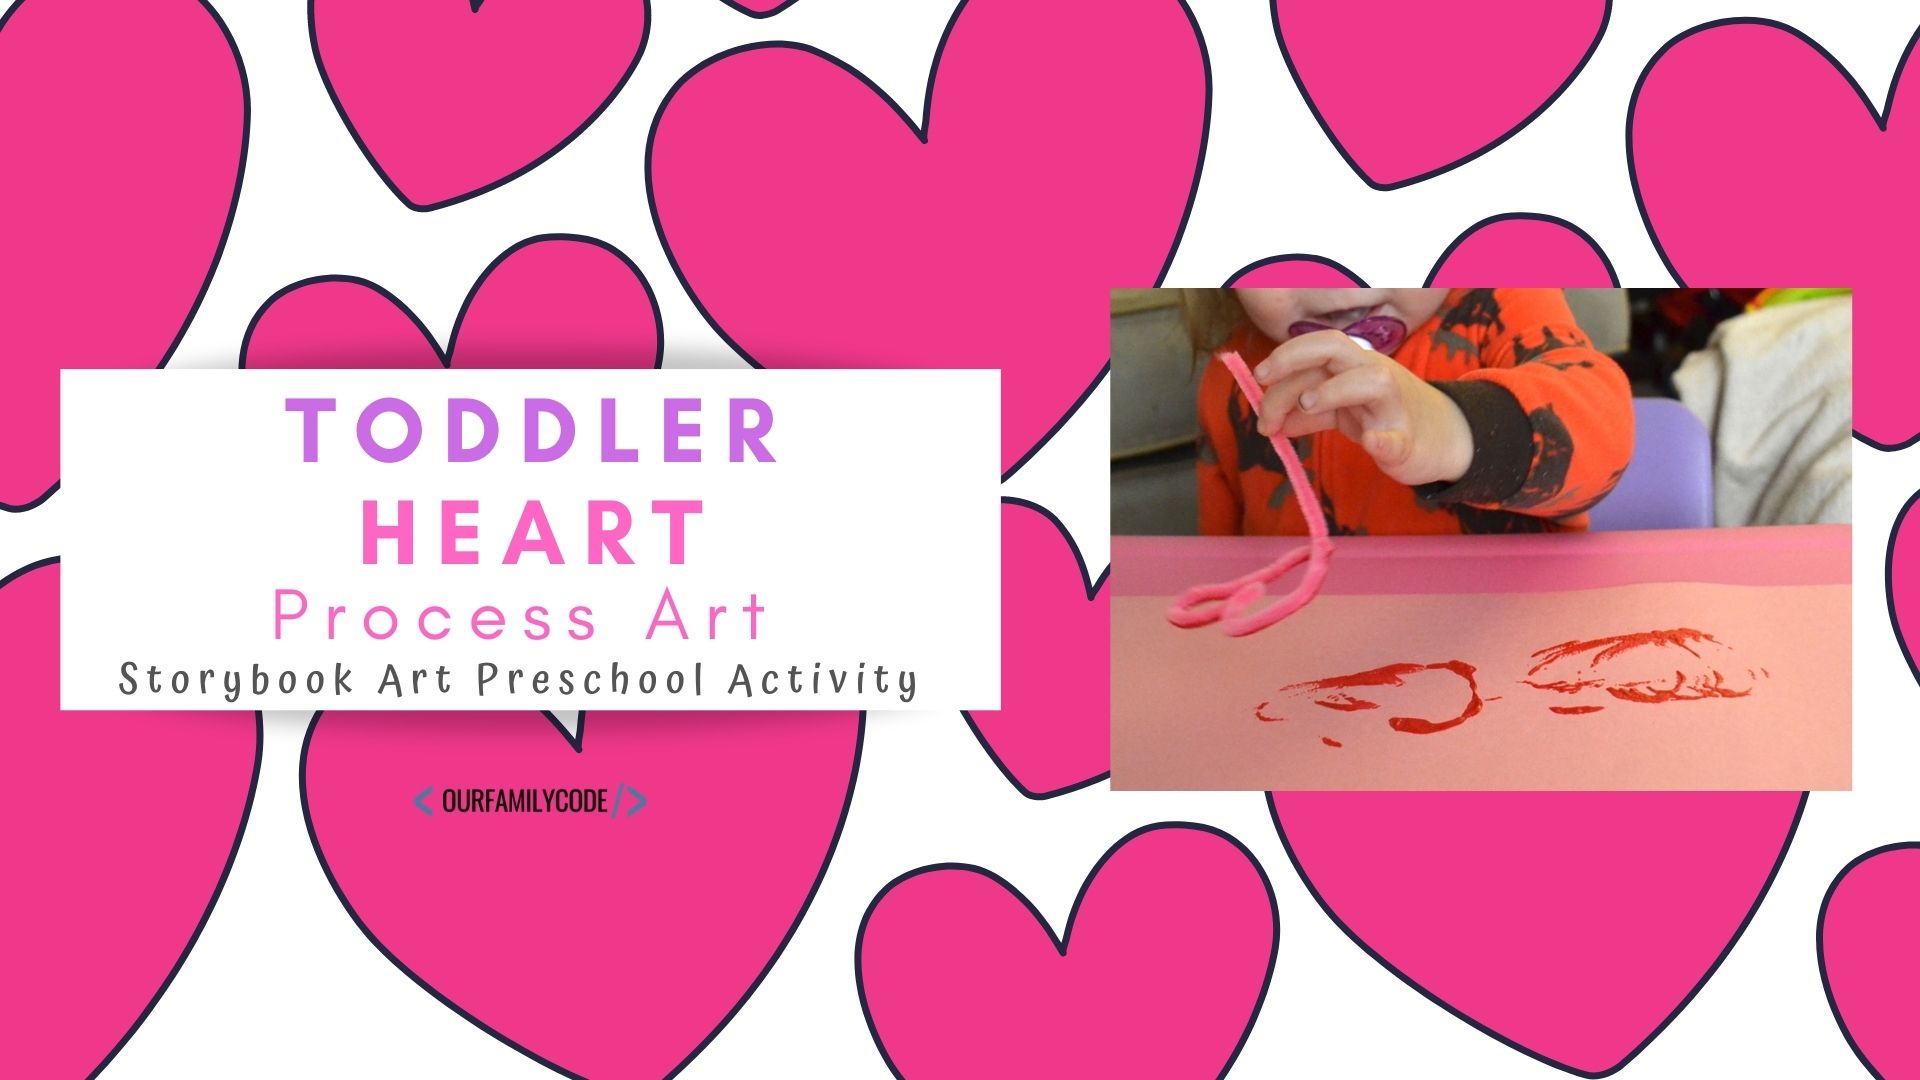 A picture of a toddler painting that says "Toddler Heart Process Art" with hearts in background.